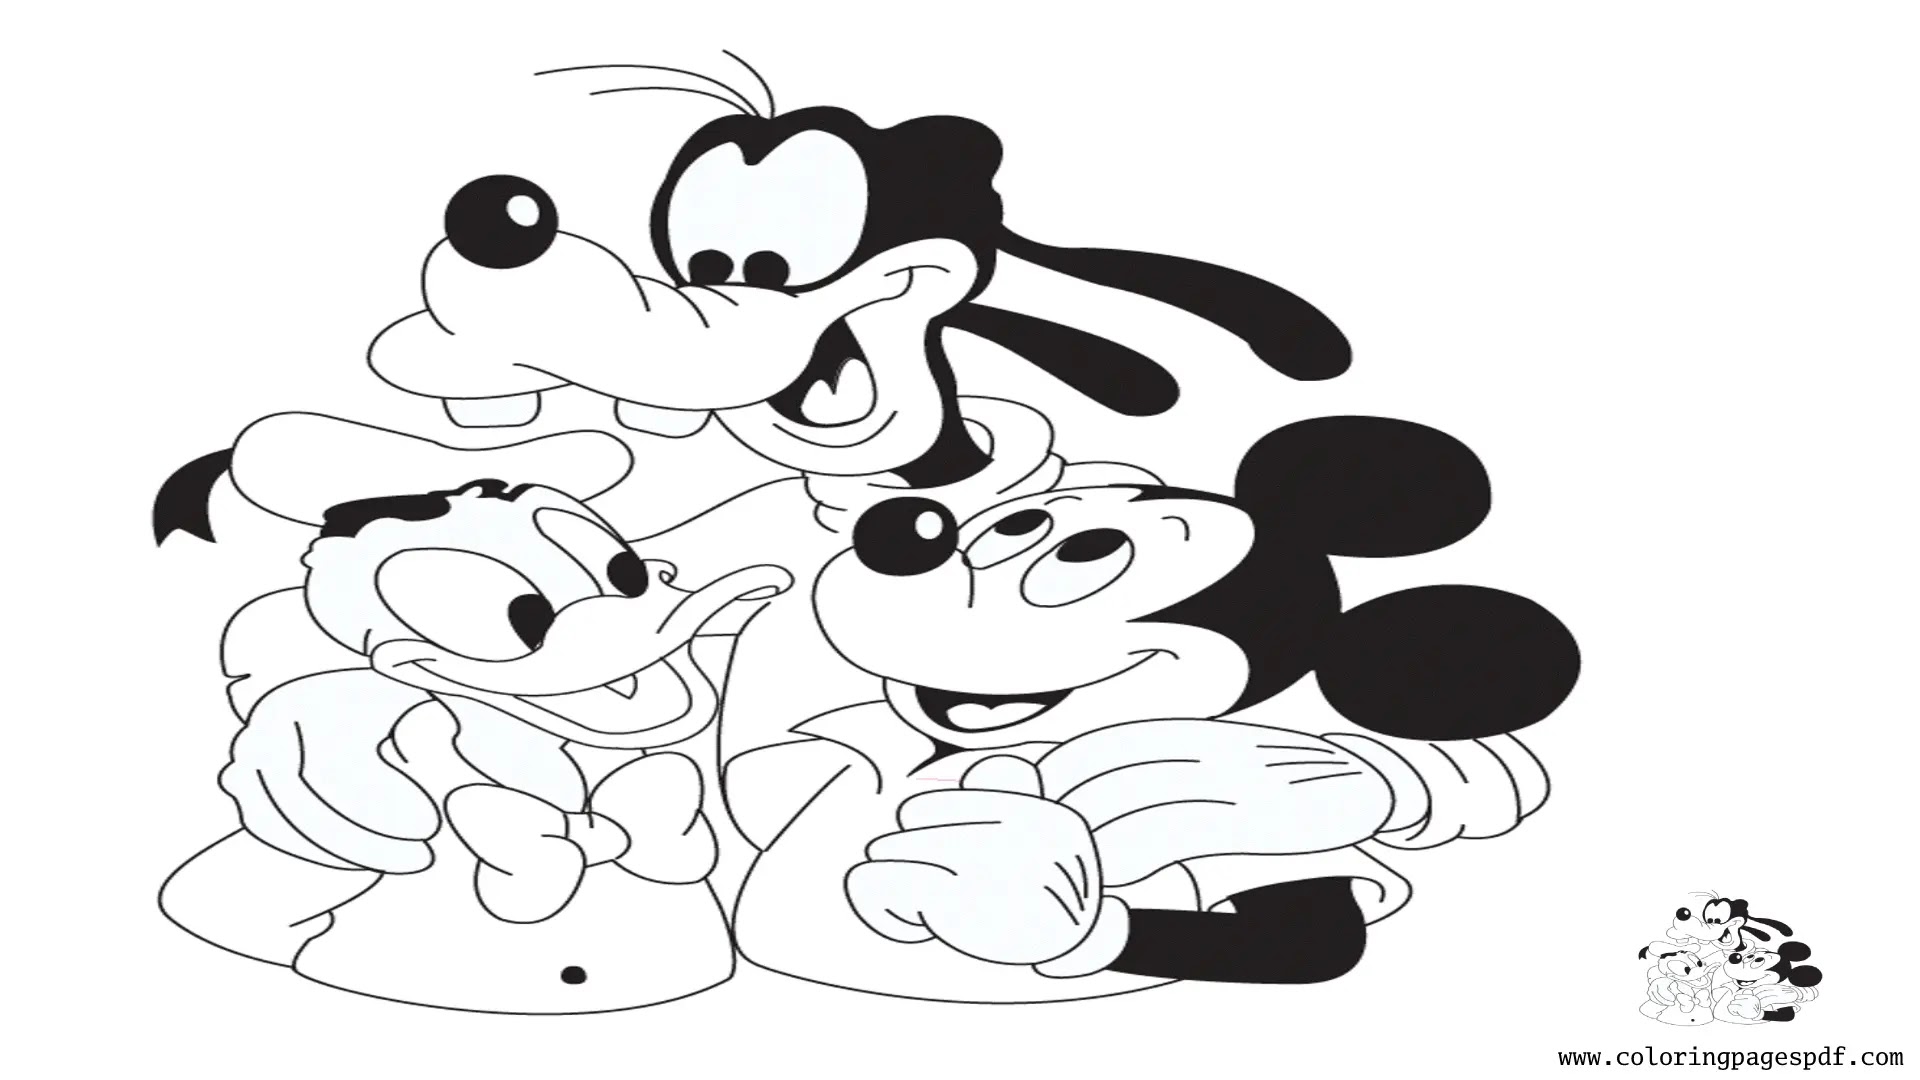 Coloring Page Of Mickey, Donald, And Goofy